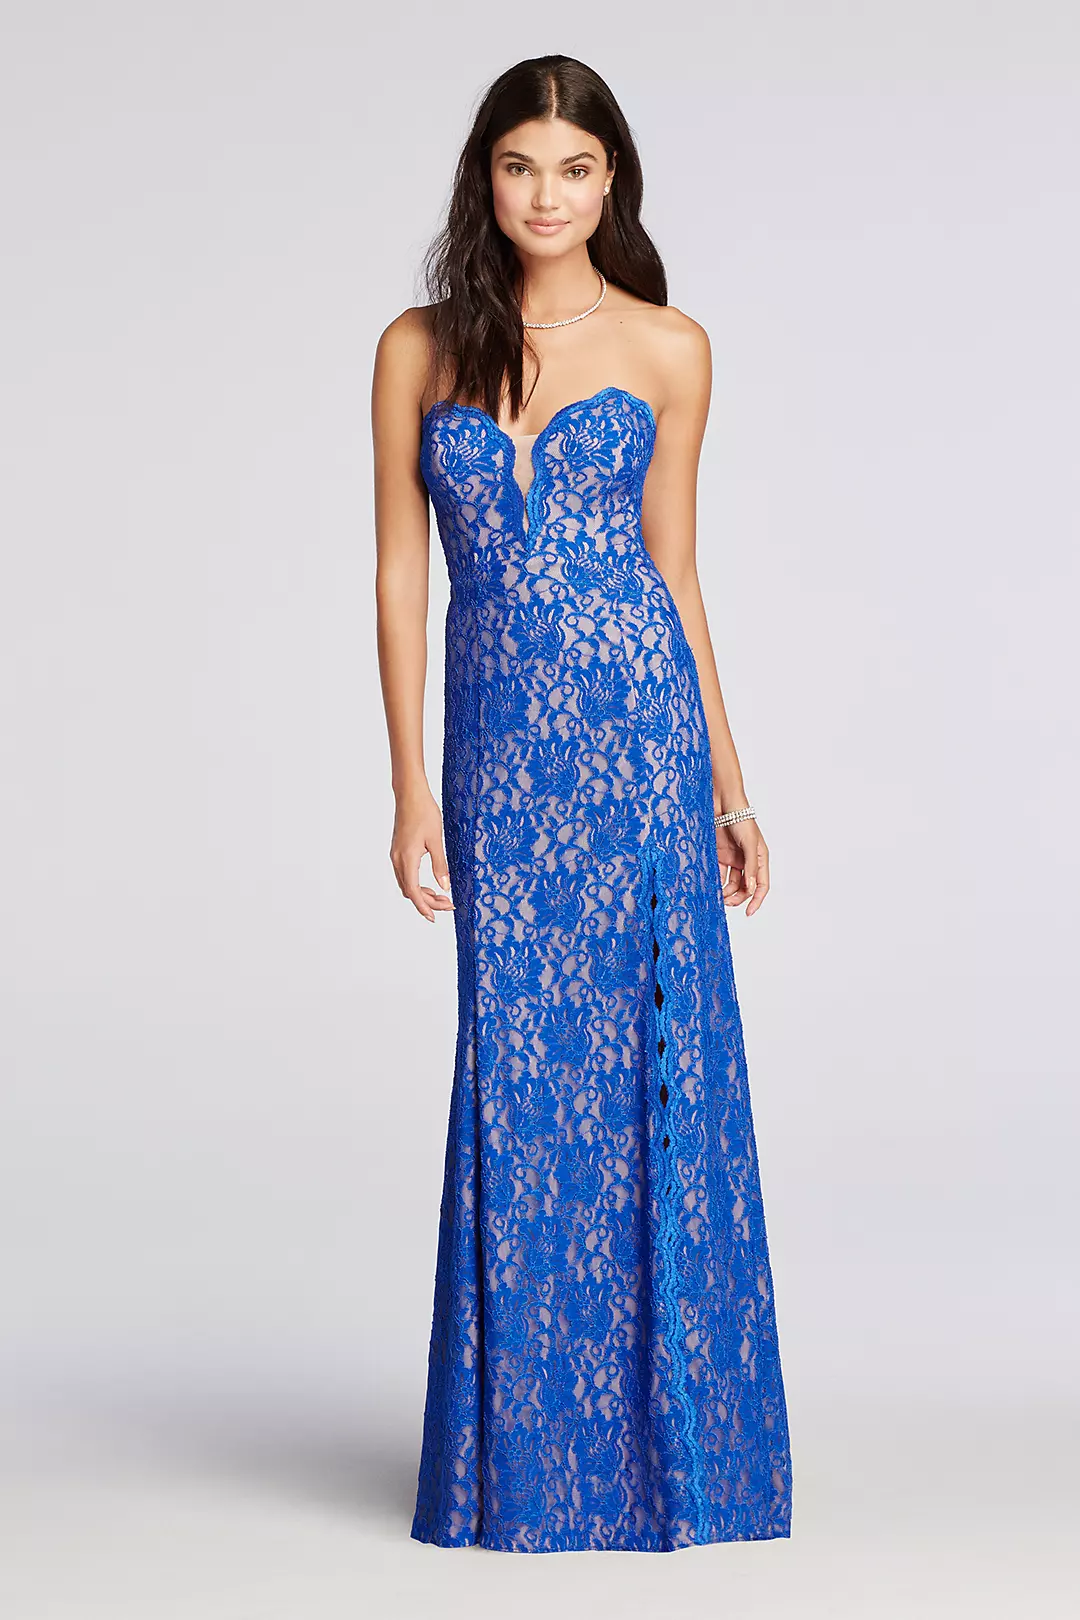 Sweetheart Neckline All Over Lace Prom Dress  Image